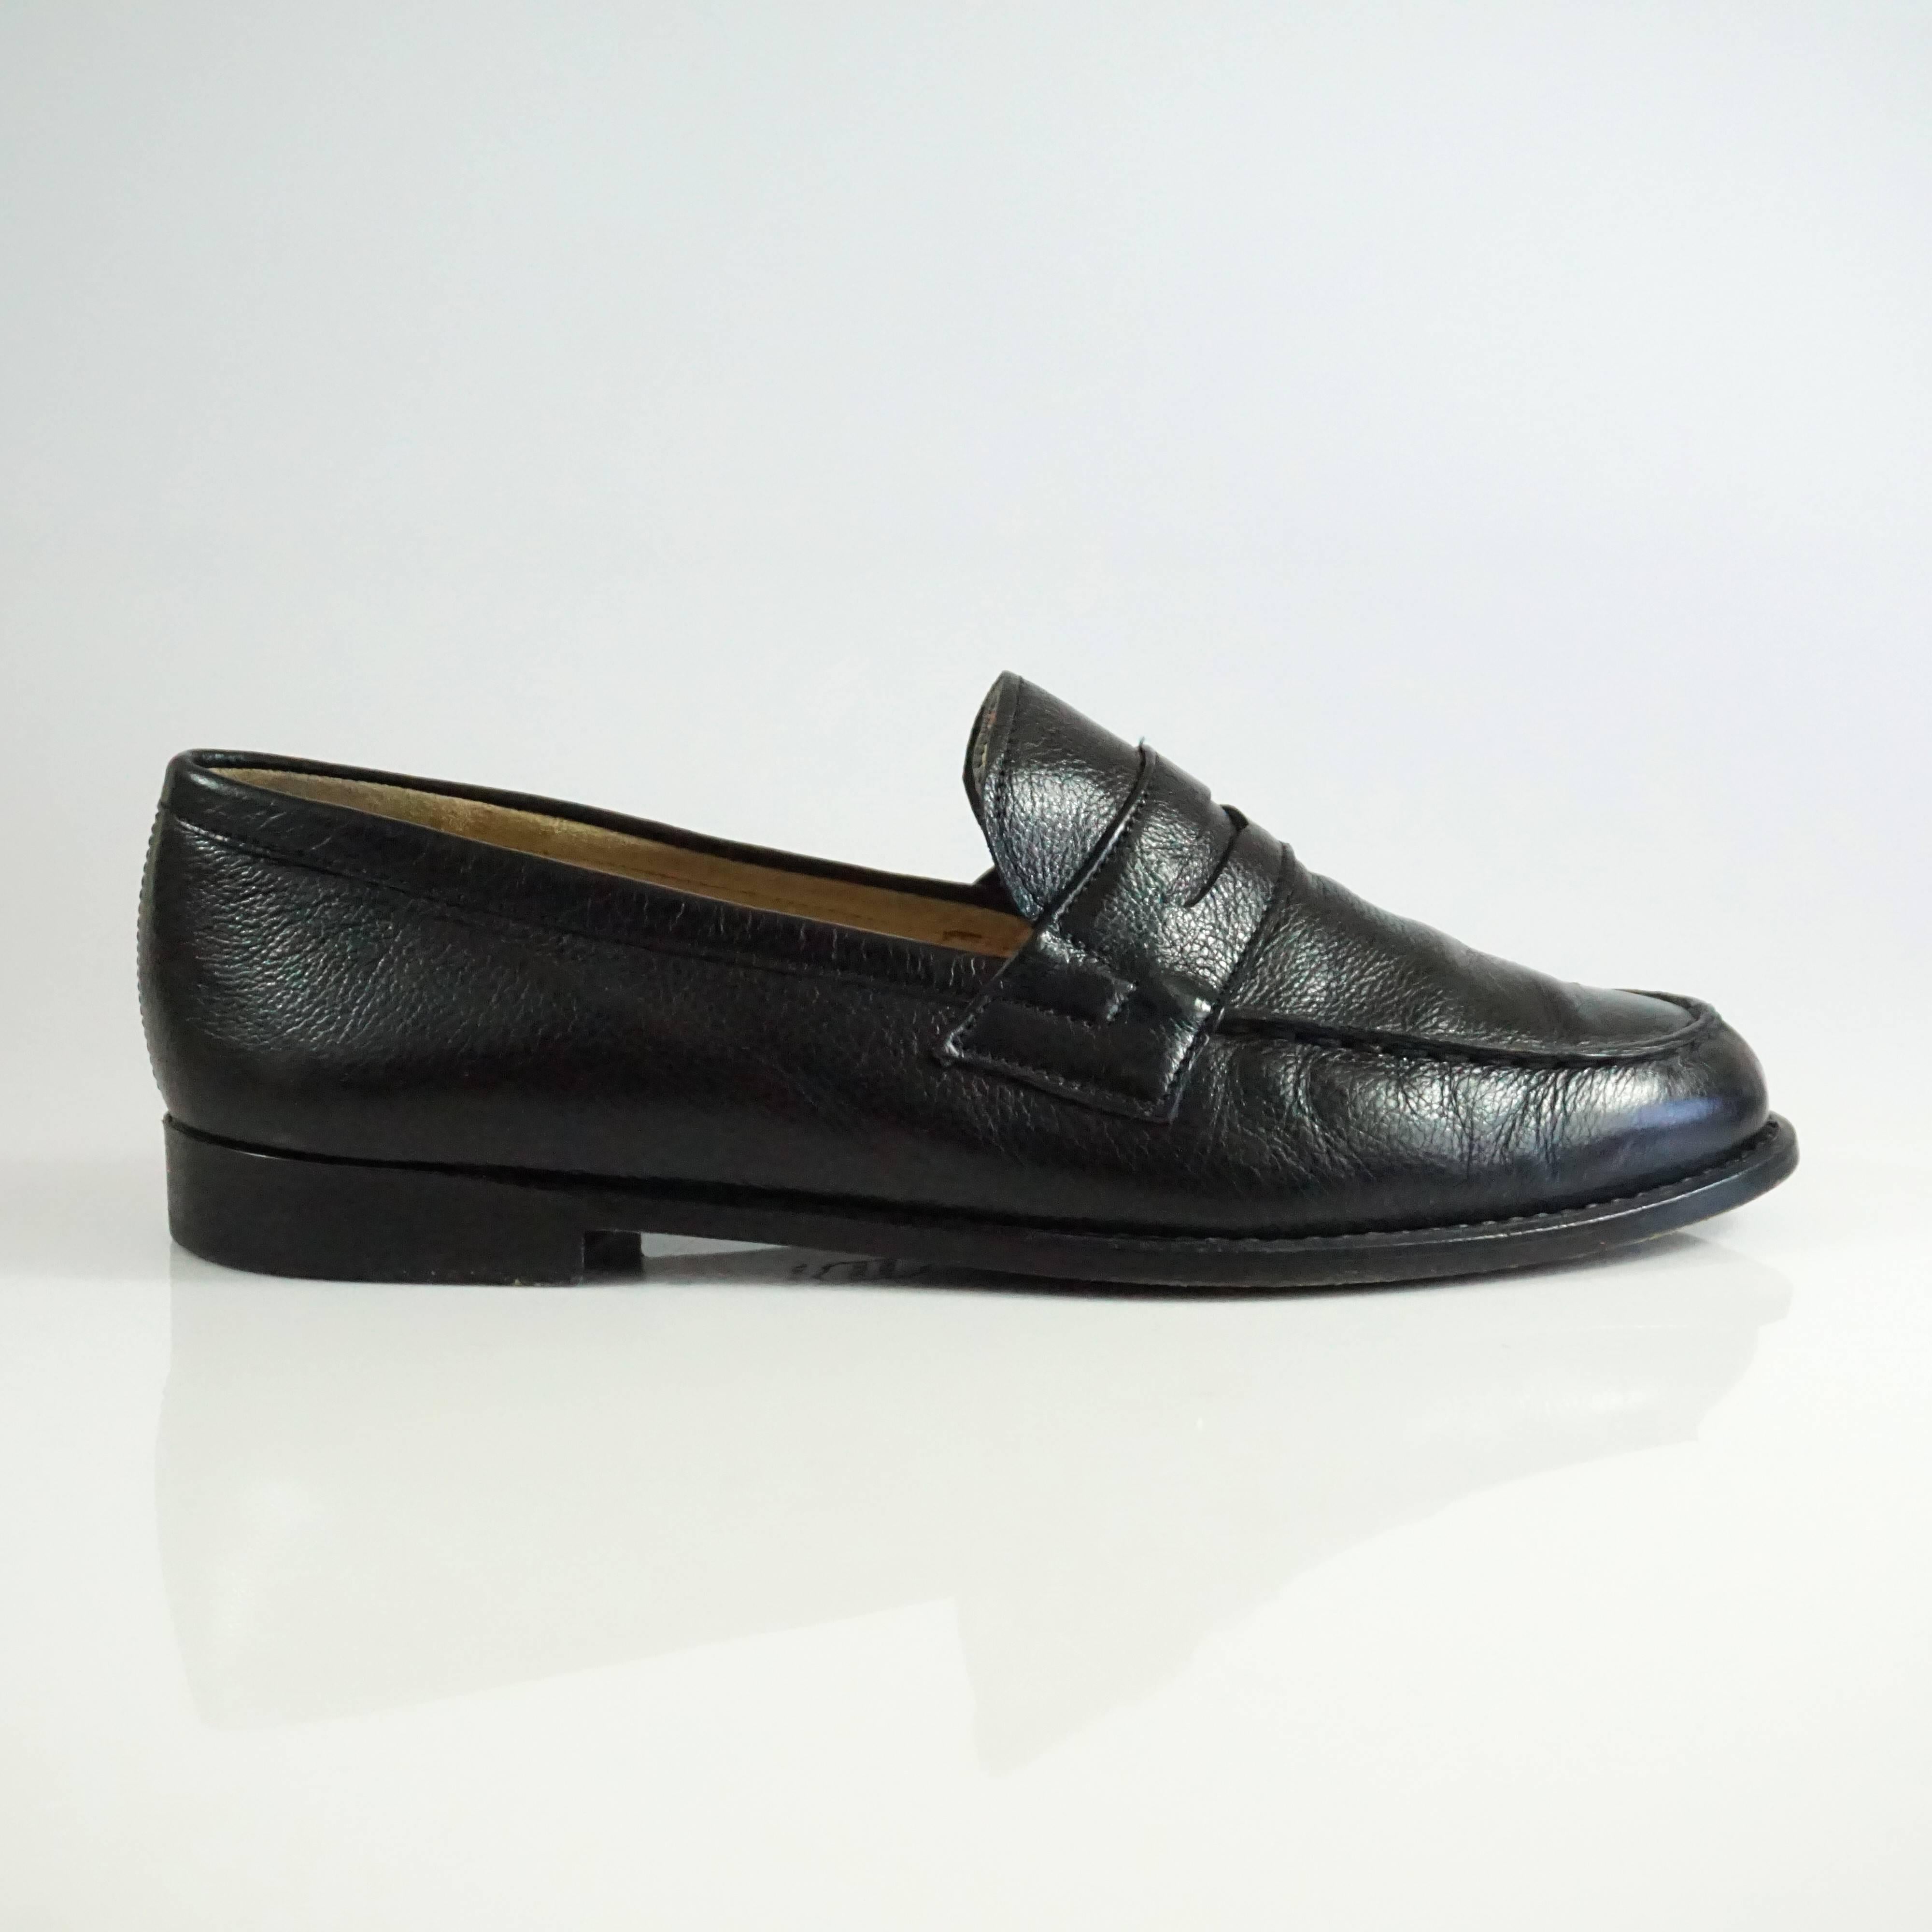 These classic Manolo Blahnik loafers are black leather. They are in very good condition with minimal wear on the bottom and the tips of the shoes. Size 37.5